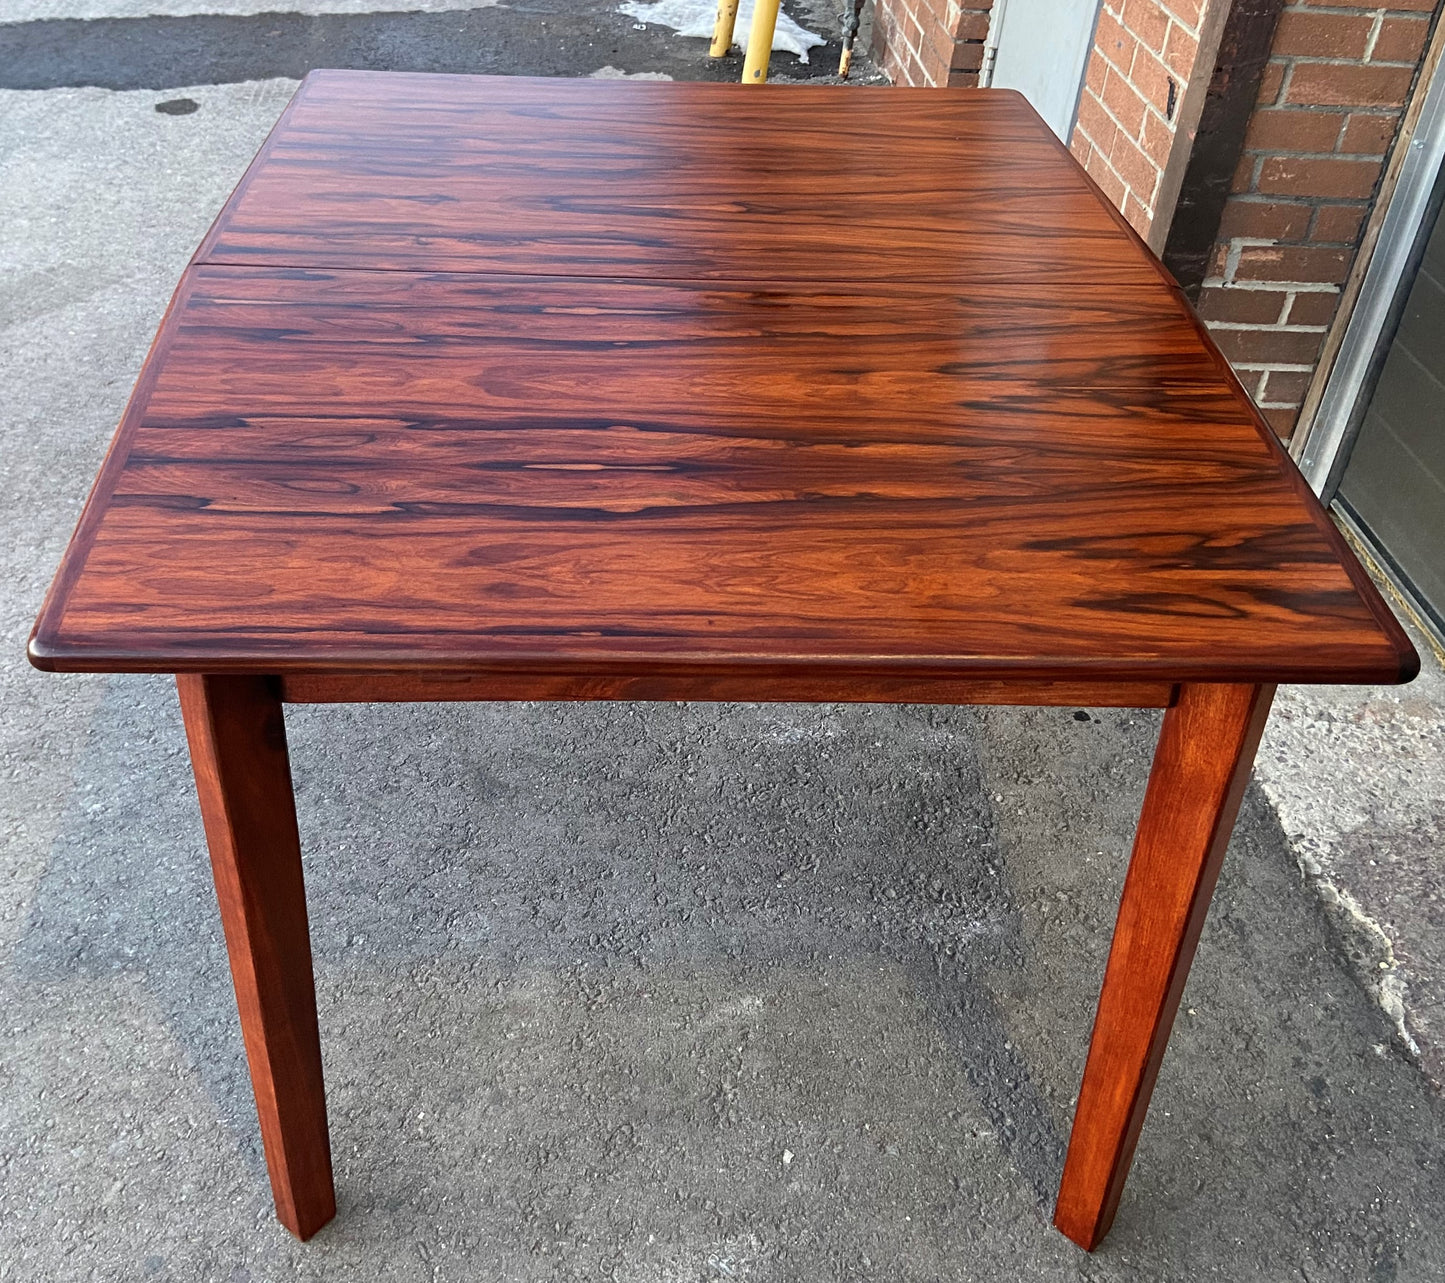 REFINISHED Danish MCM Brazilian Rosewood Table w butterfly leaf 52"-72.5" PERFECT